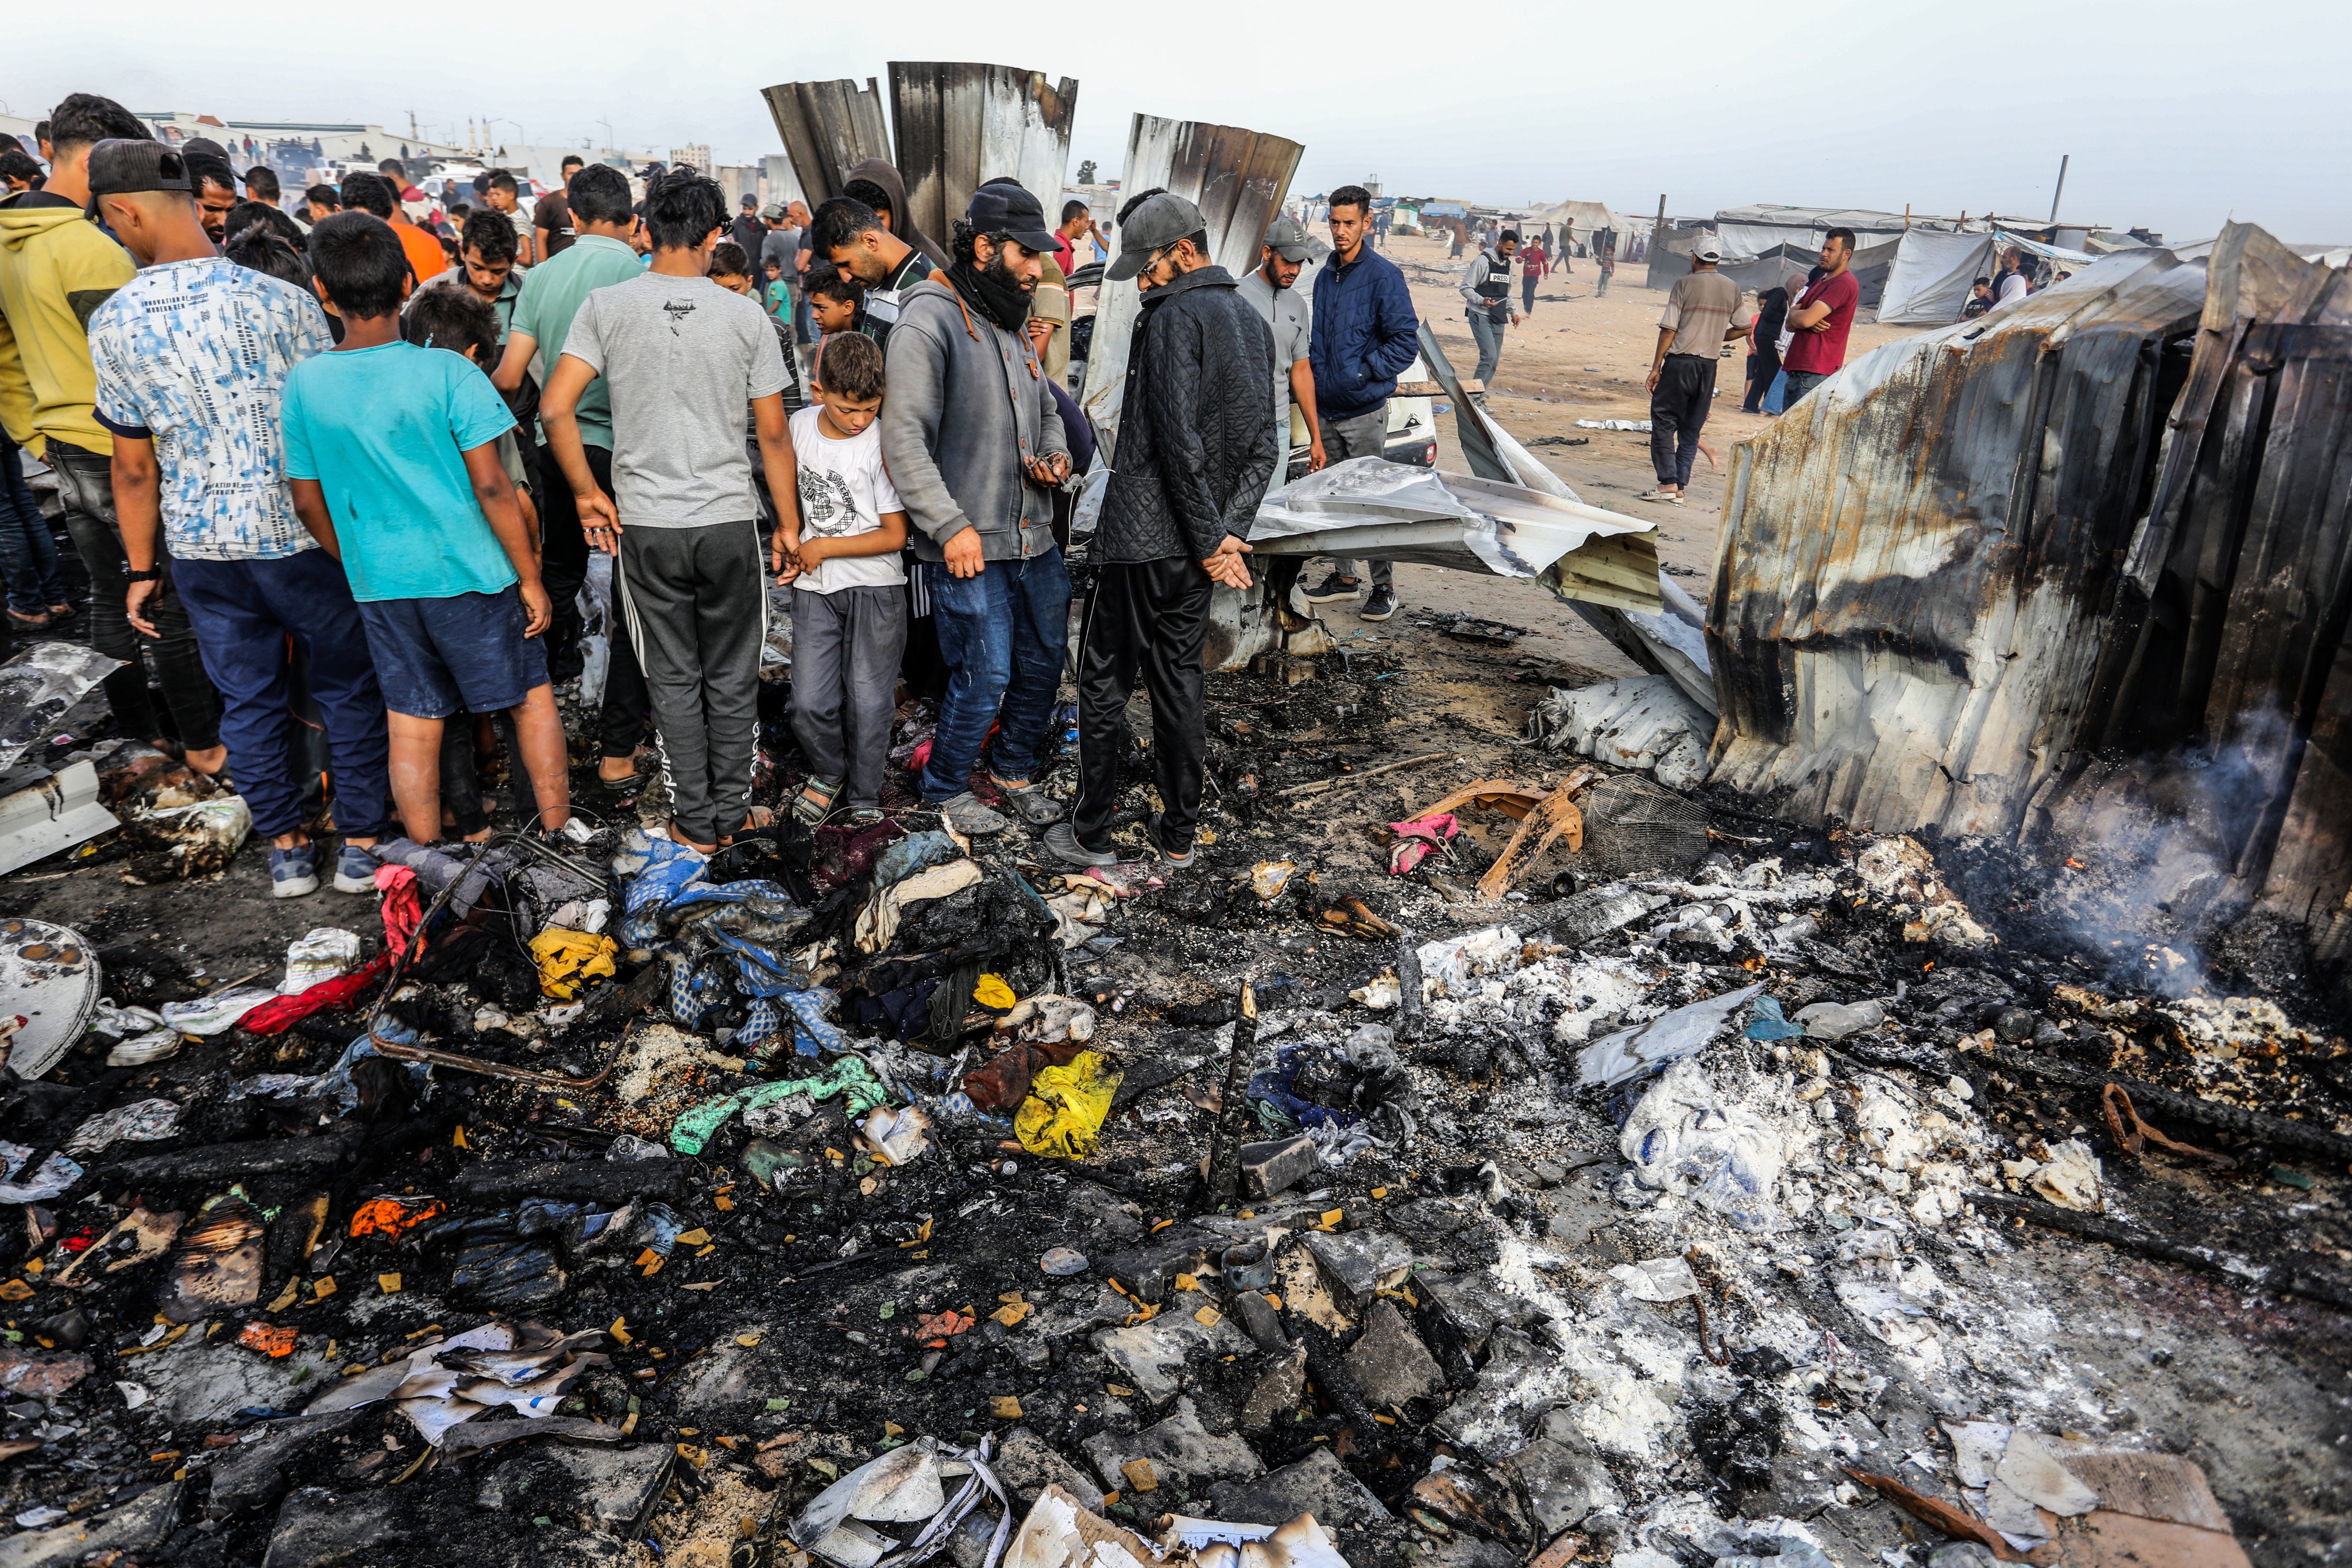 Palestinians inspect their destroyed tents after an Israeli air strike, which resulted in numerous deaths and  injuries, in the Al-Mawasi area. Photo: dpa